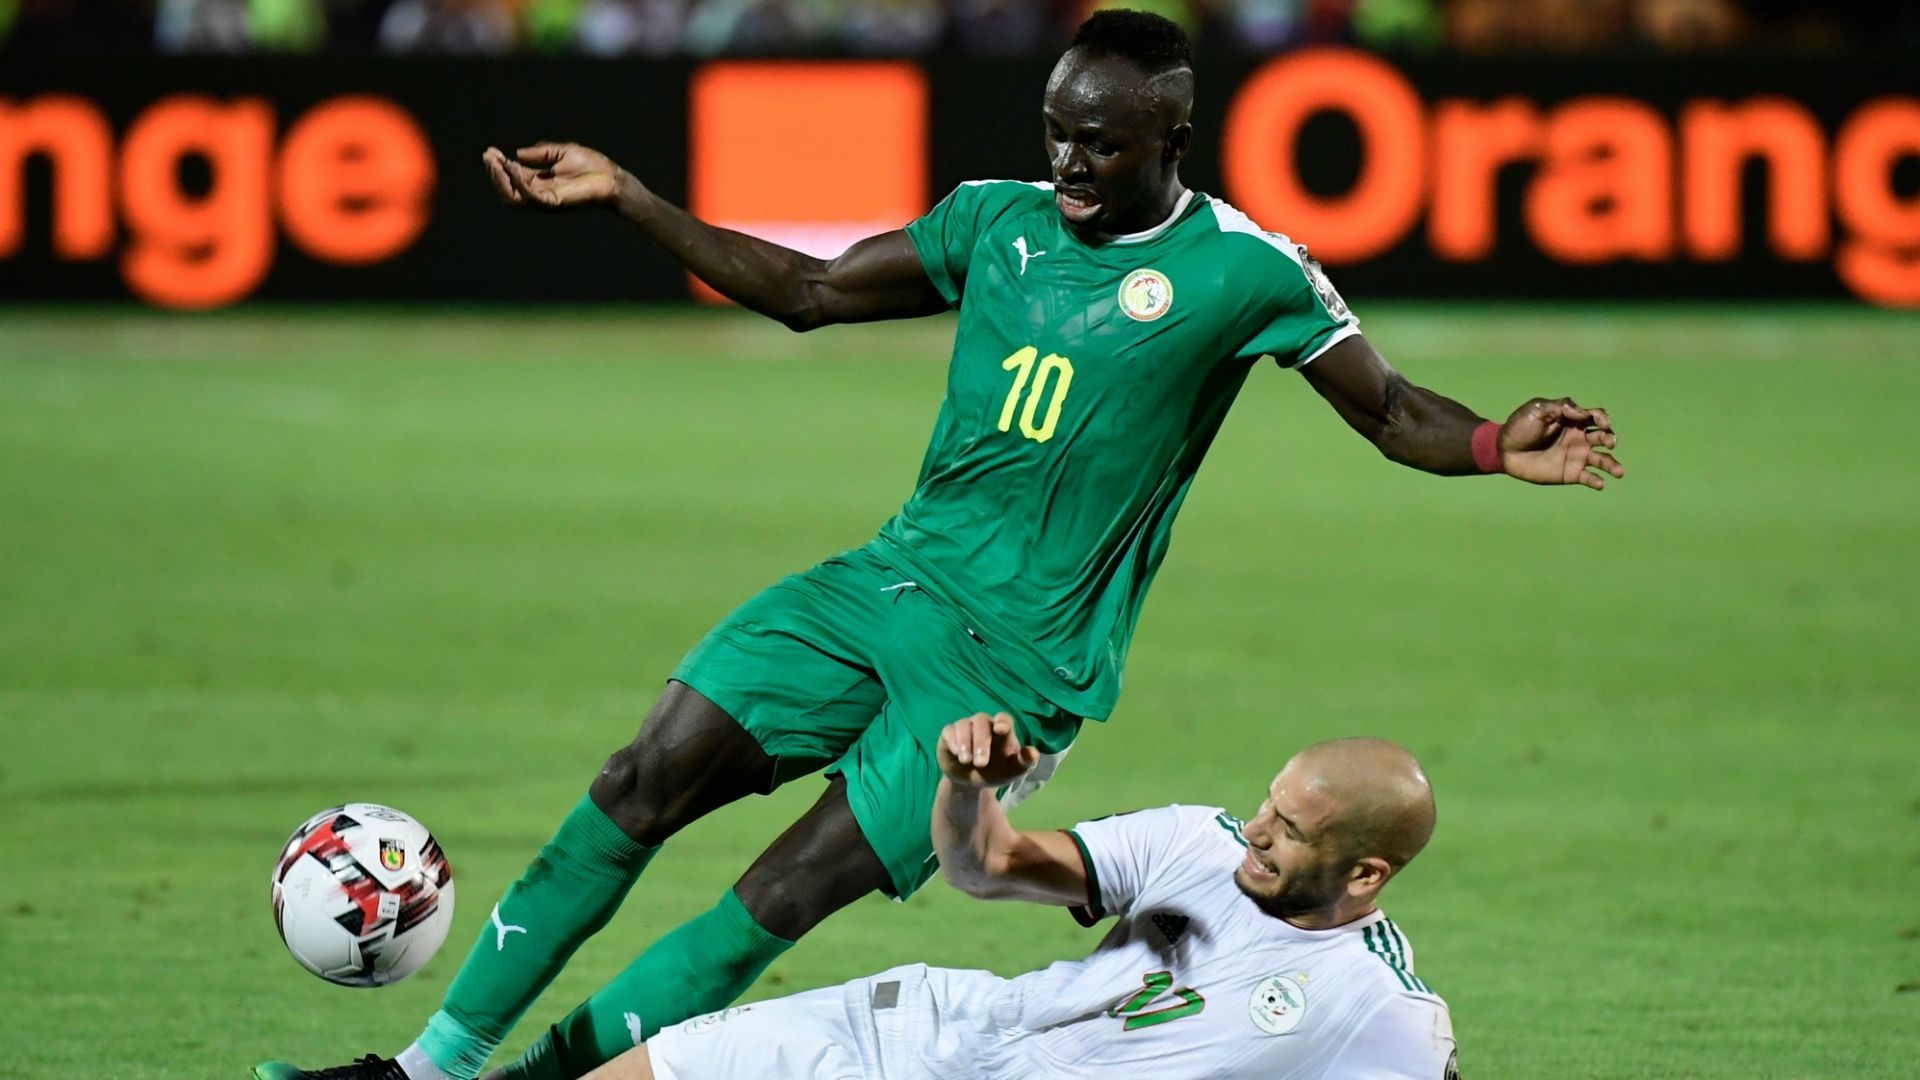 Rwanda face reigning champions Senegal in their AFCON qualifying fixture on Tuesday